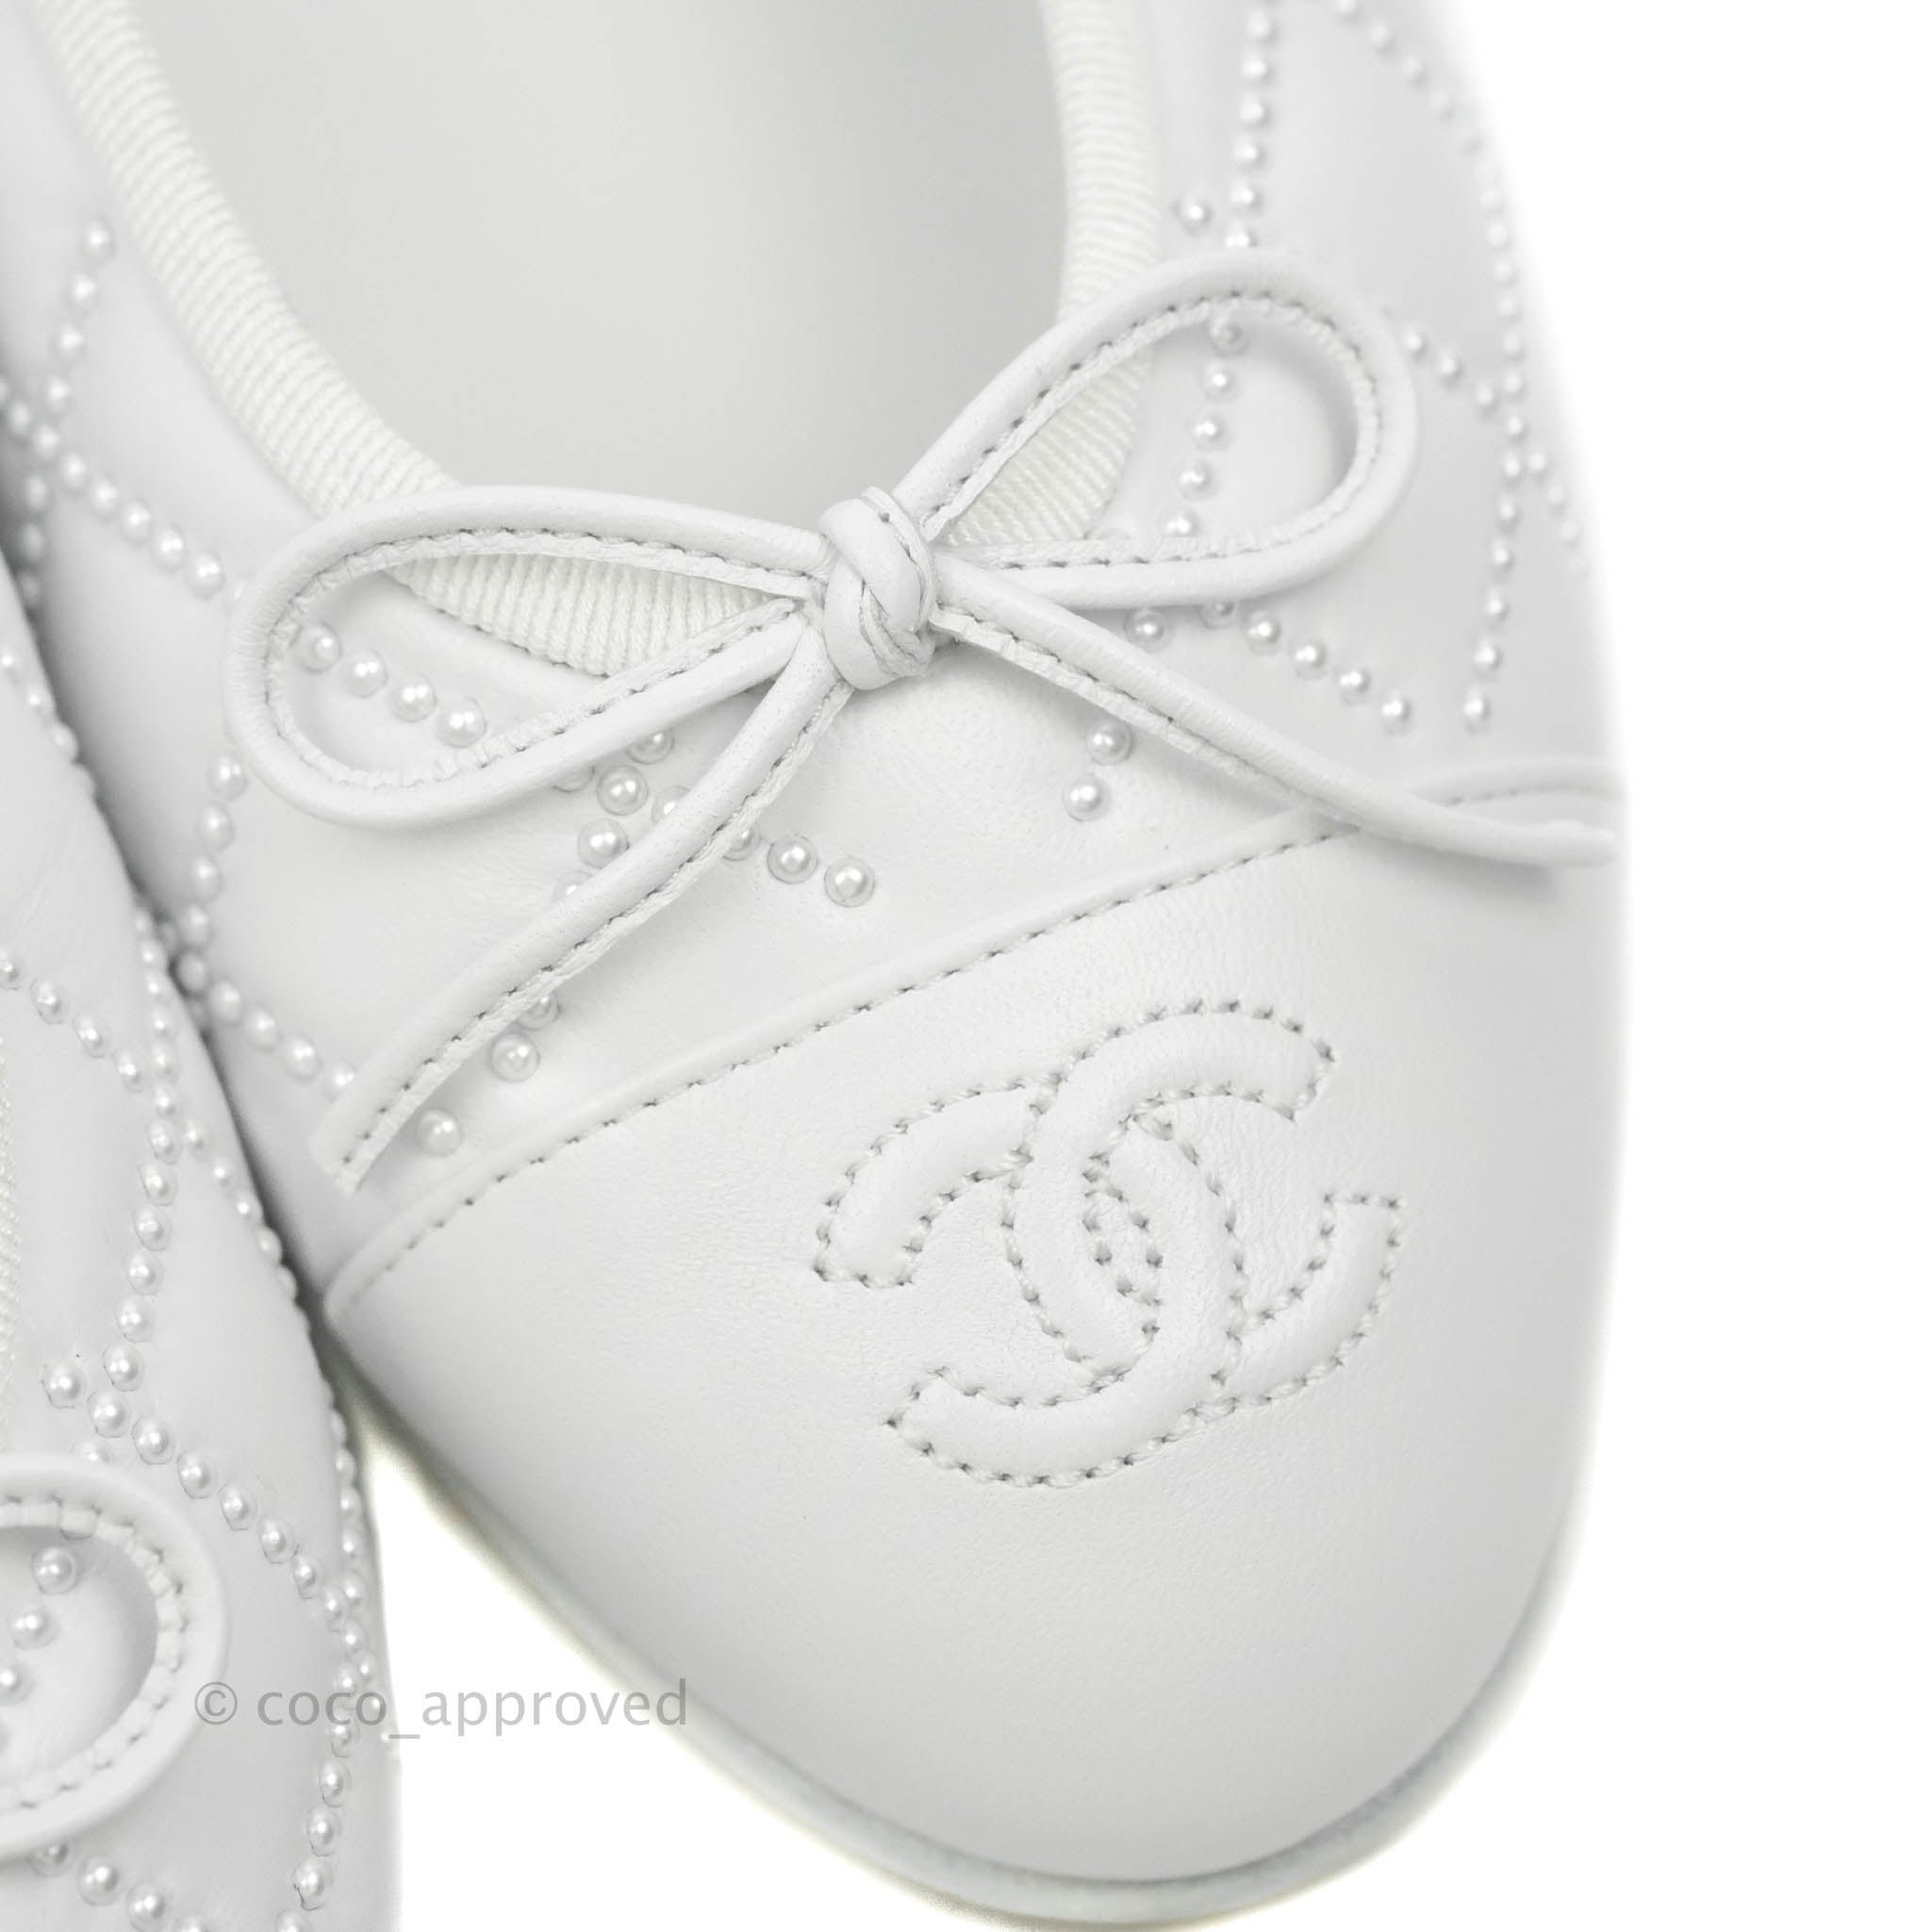 Where to buy the Chanel ballet flat